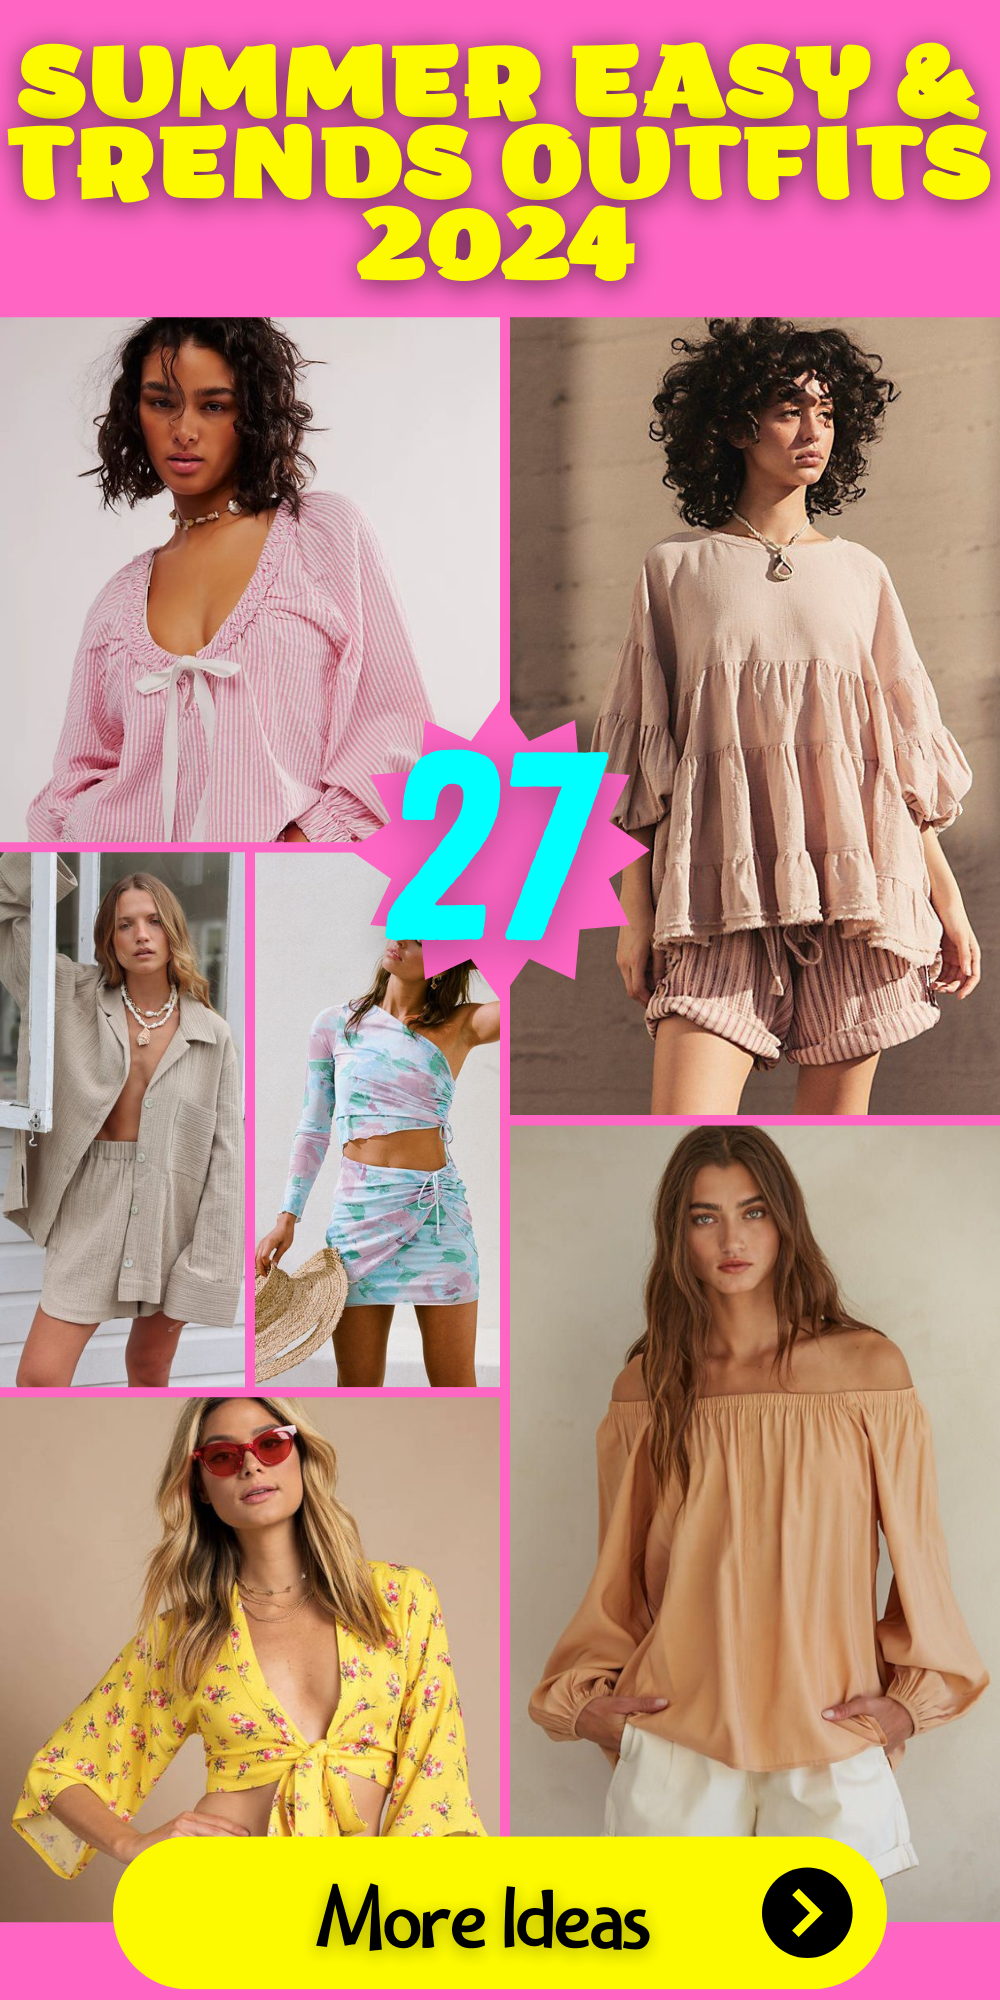 Breezy & Stylish: Summer Easy & Trends Outfits 2024